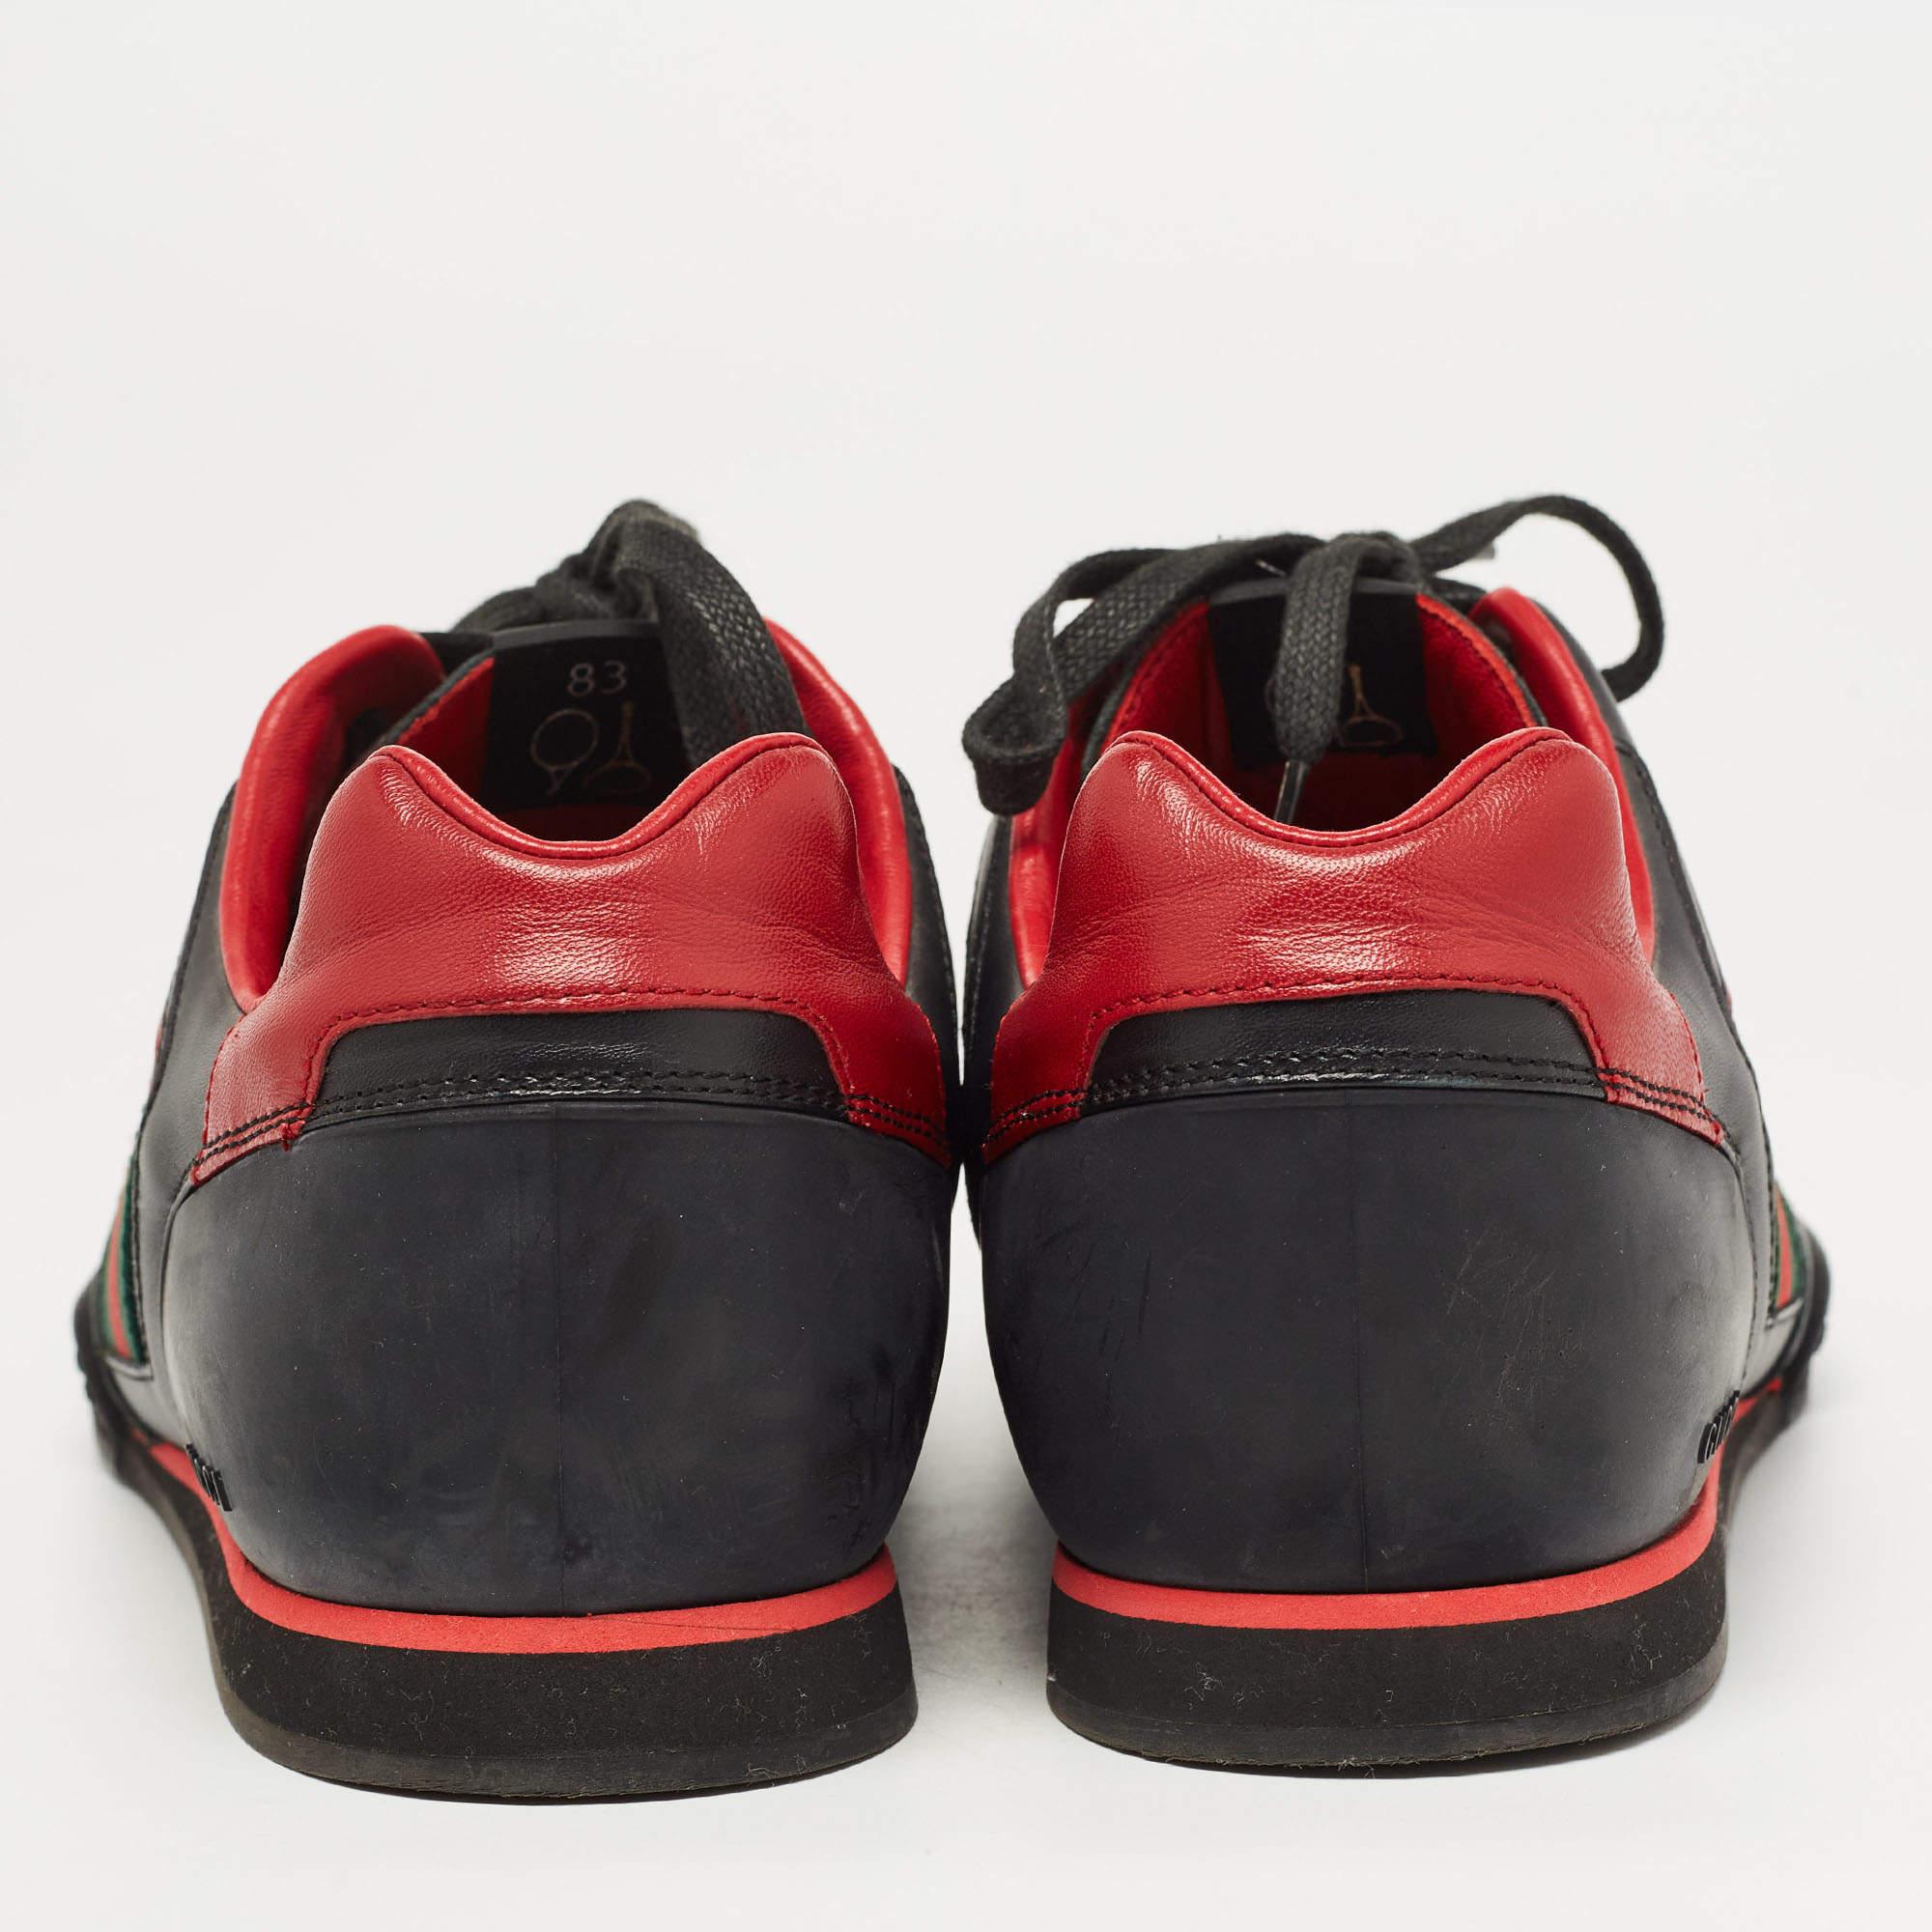 Gucci Black/Red Leather and Mesh Vintage Tennis Sneakers Size 43.5 For Sale 3